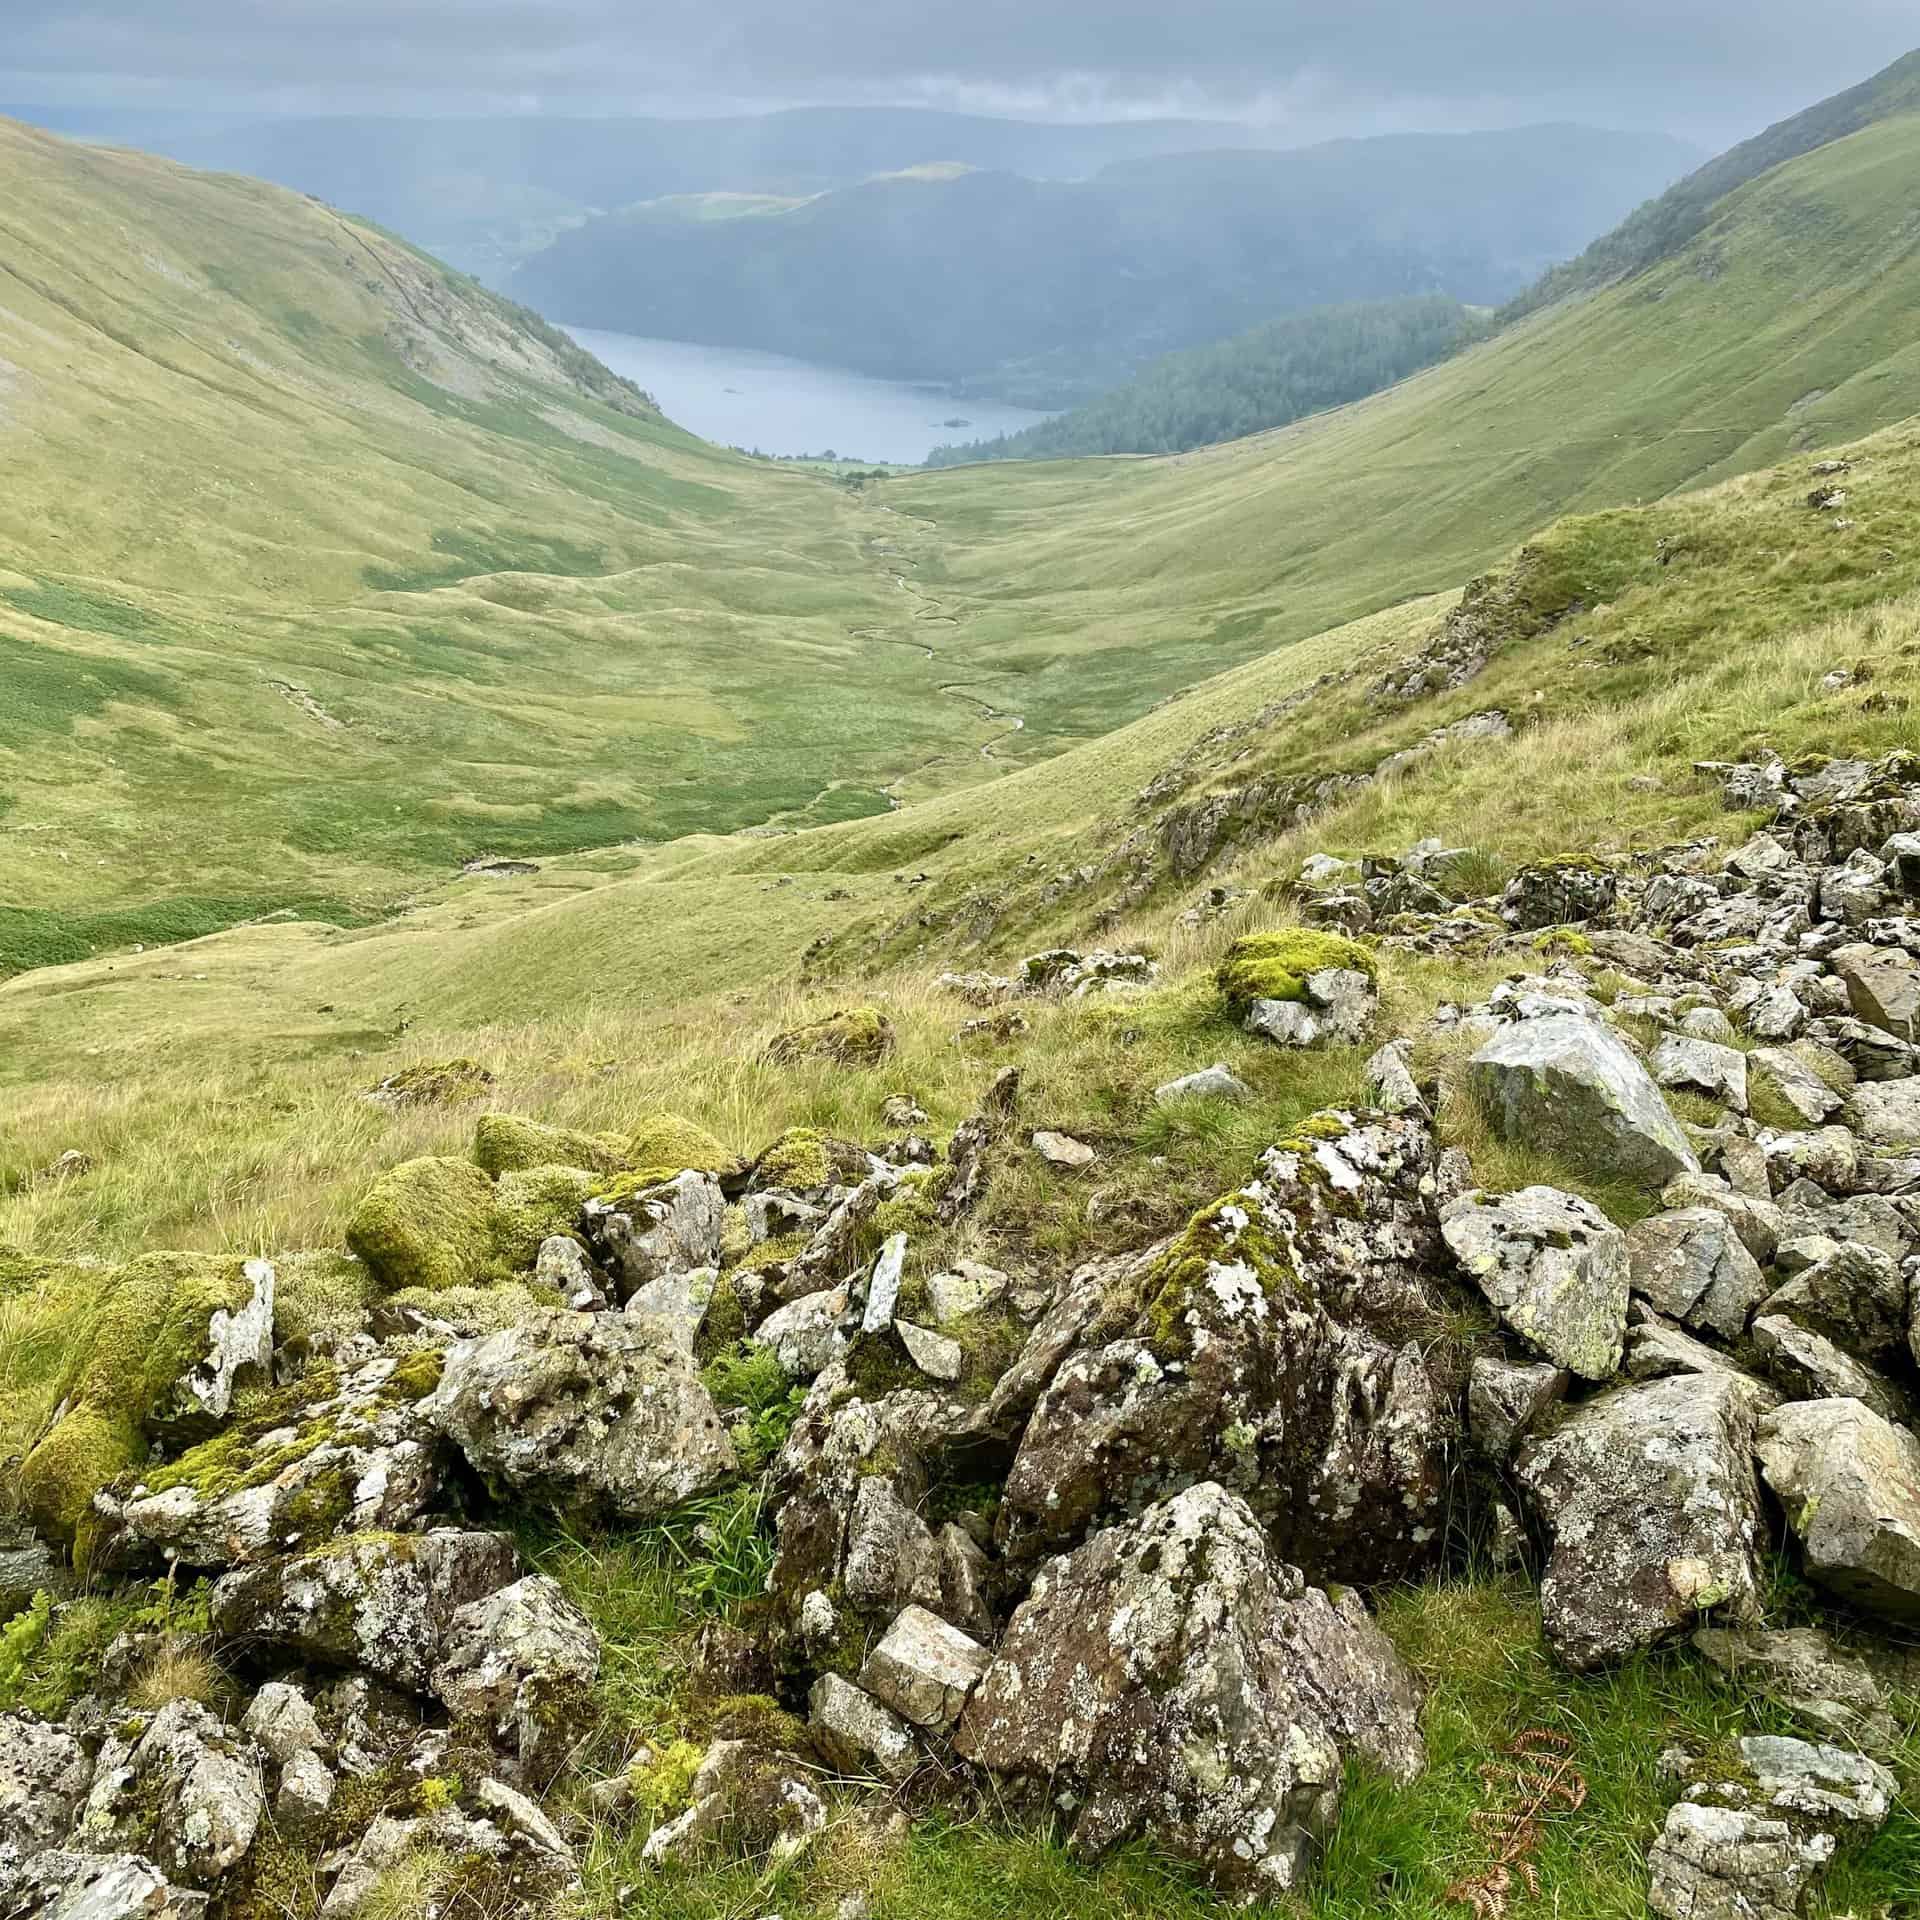 Glencoyne Beck can clearly be seen meandering its way through the valley on course for Ullswater.